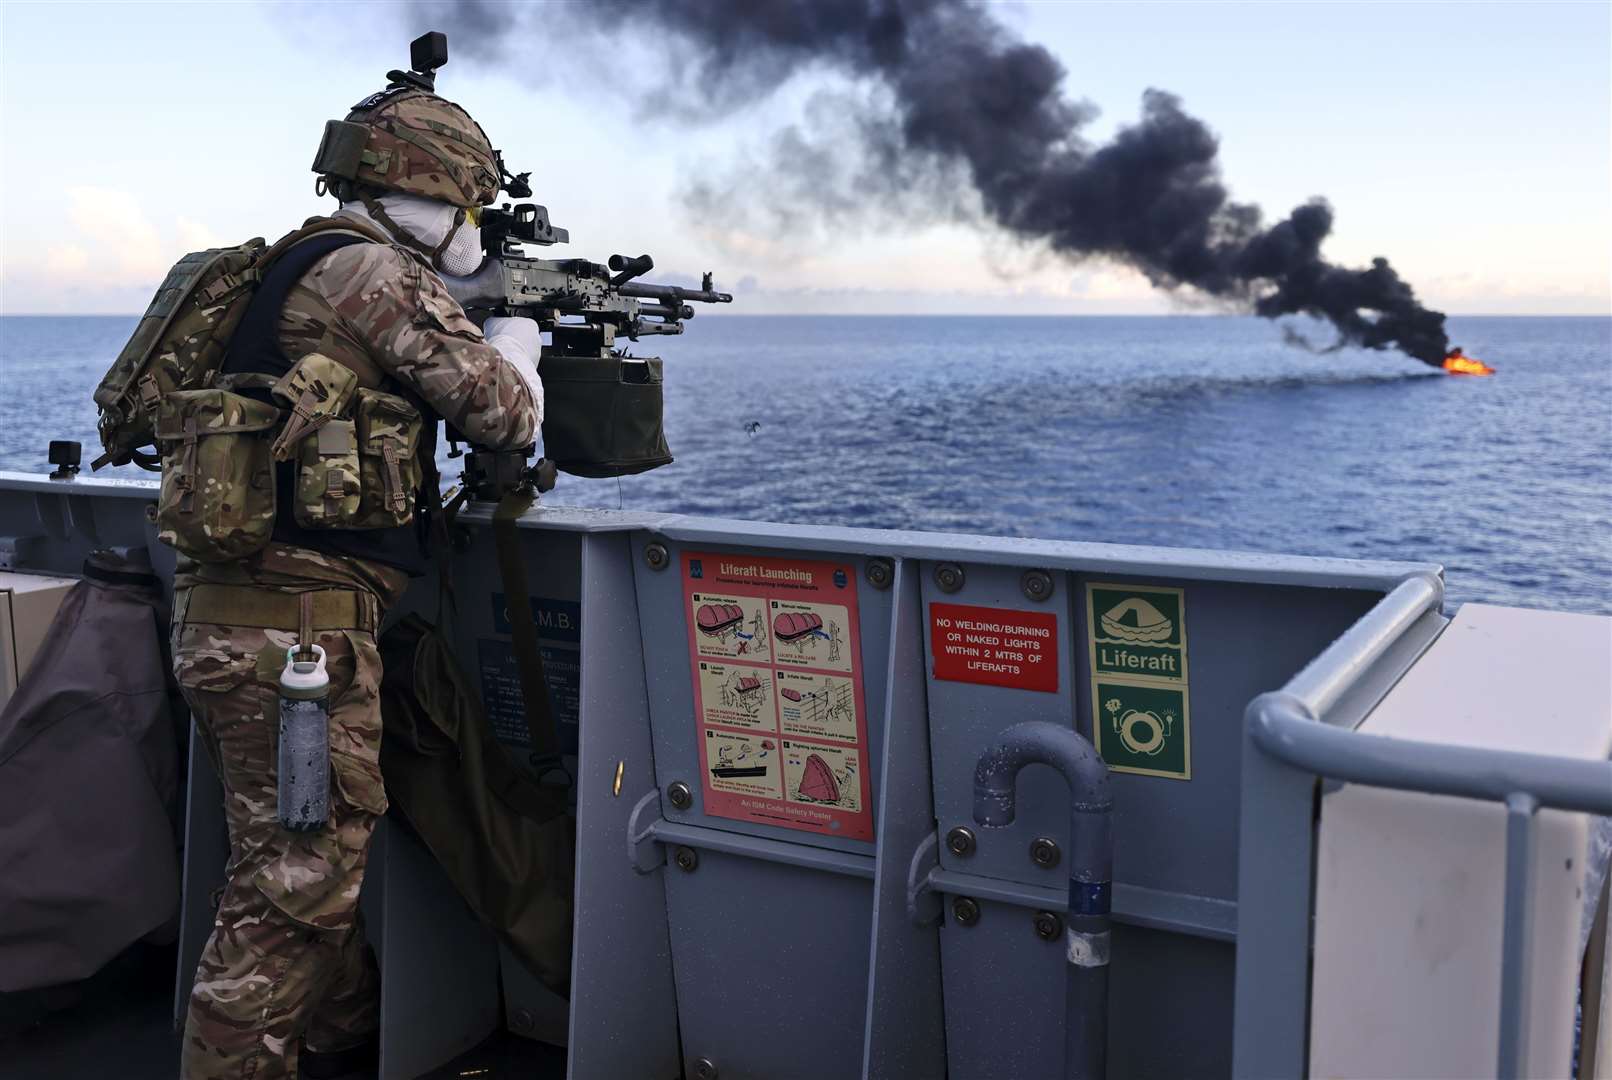 Officers on the HMS Medway sunk the drugs vessel after its crew were arrested. Picture: Royal Navy